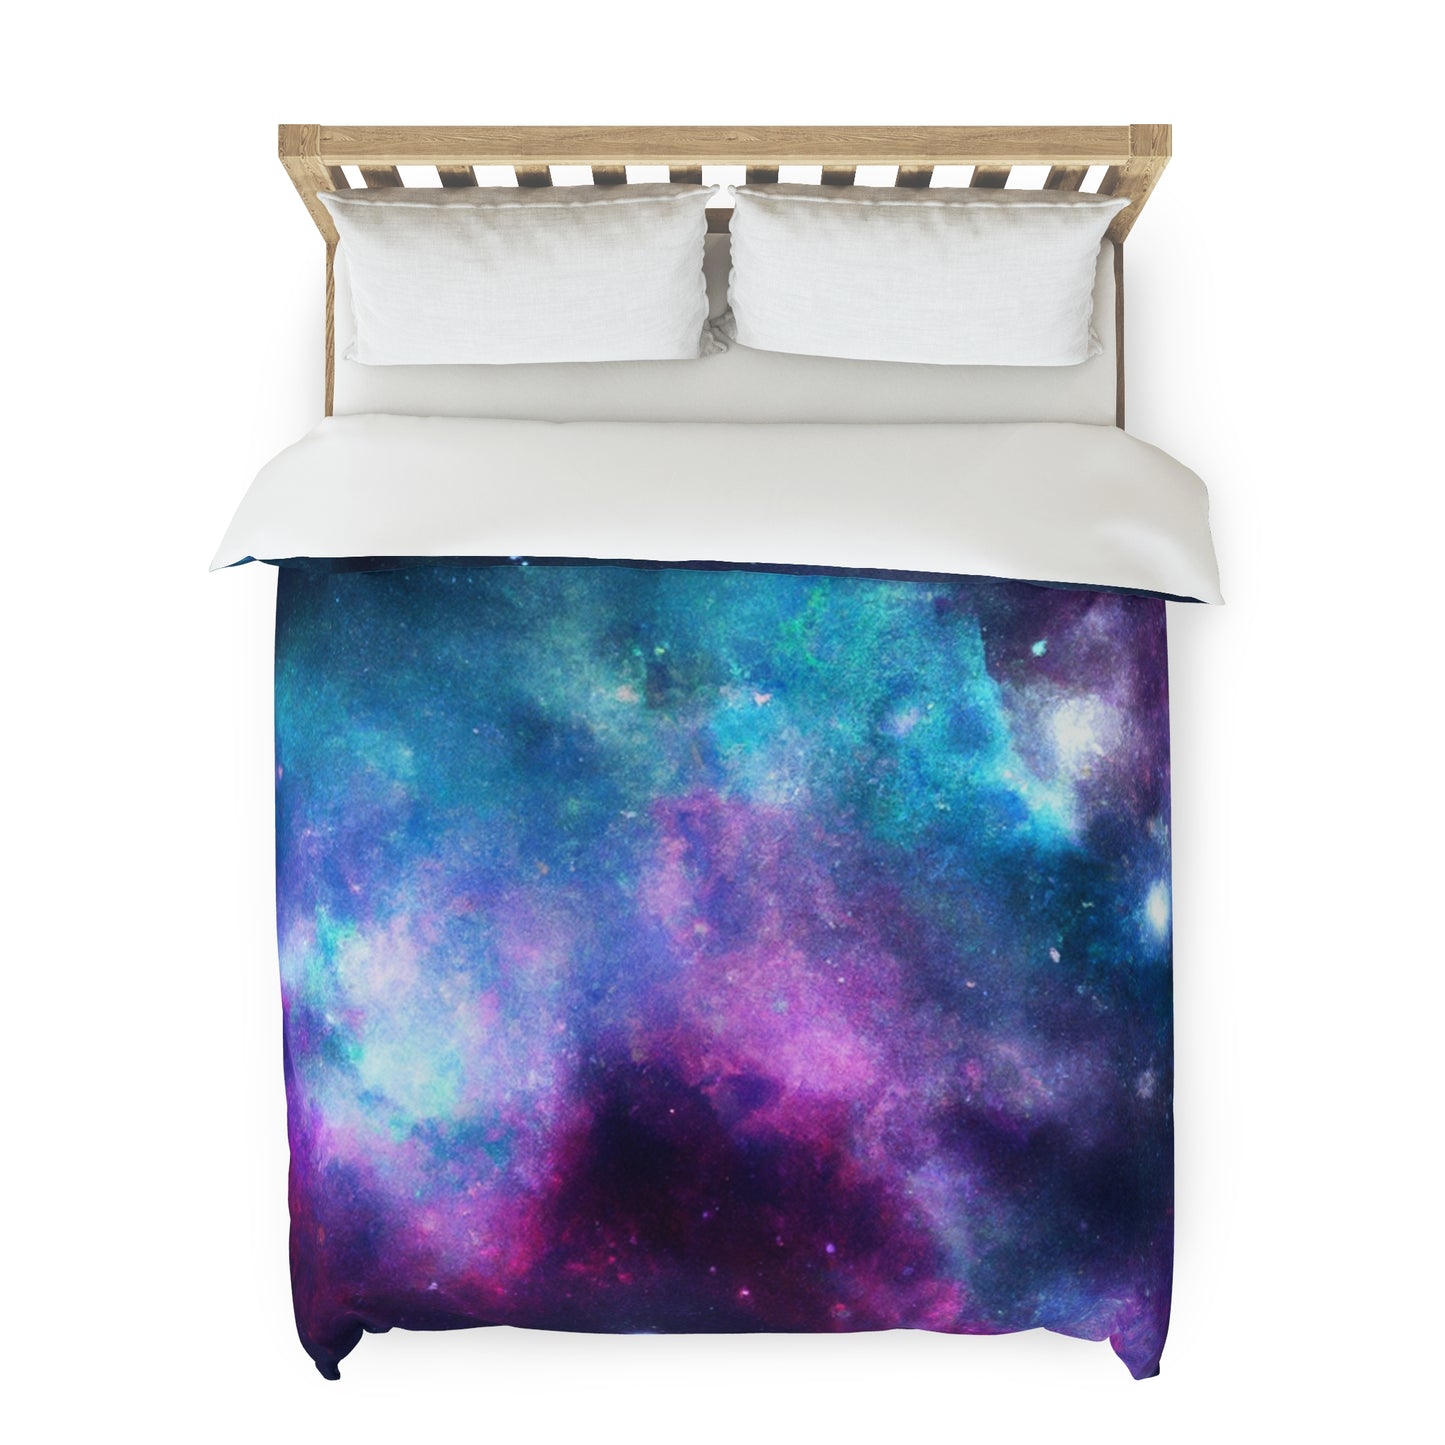 Sunny Dreams of A Starry Night - Astronomy Duvet Bed Cover